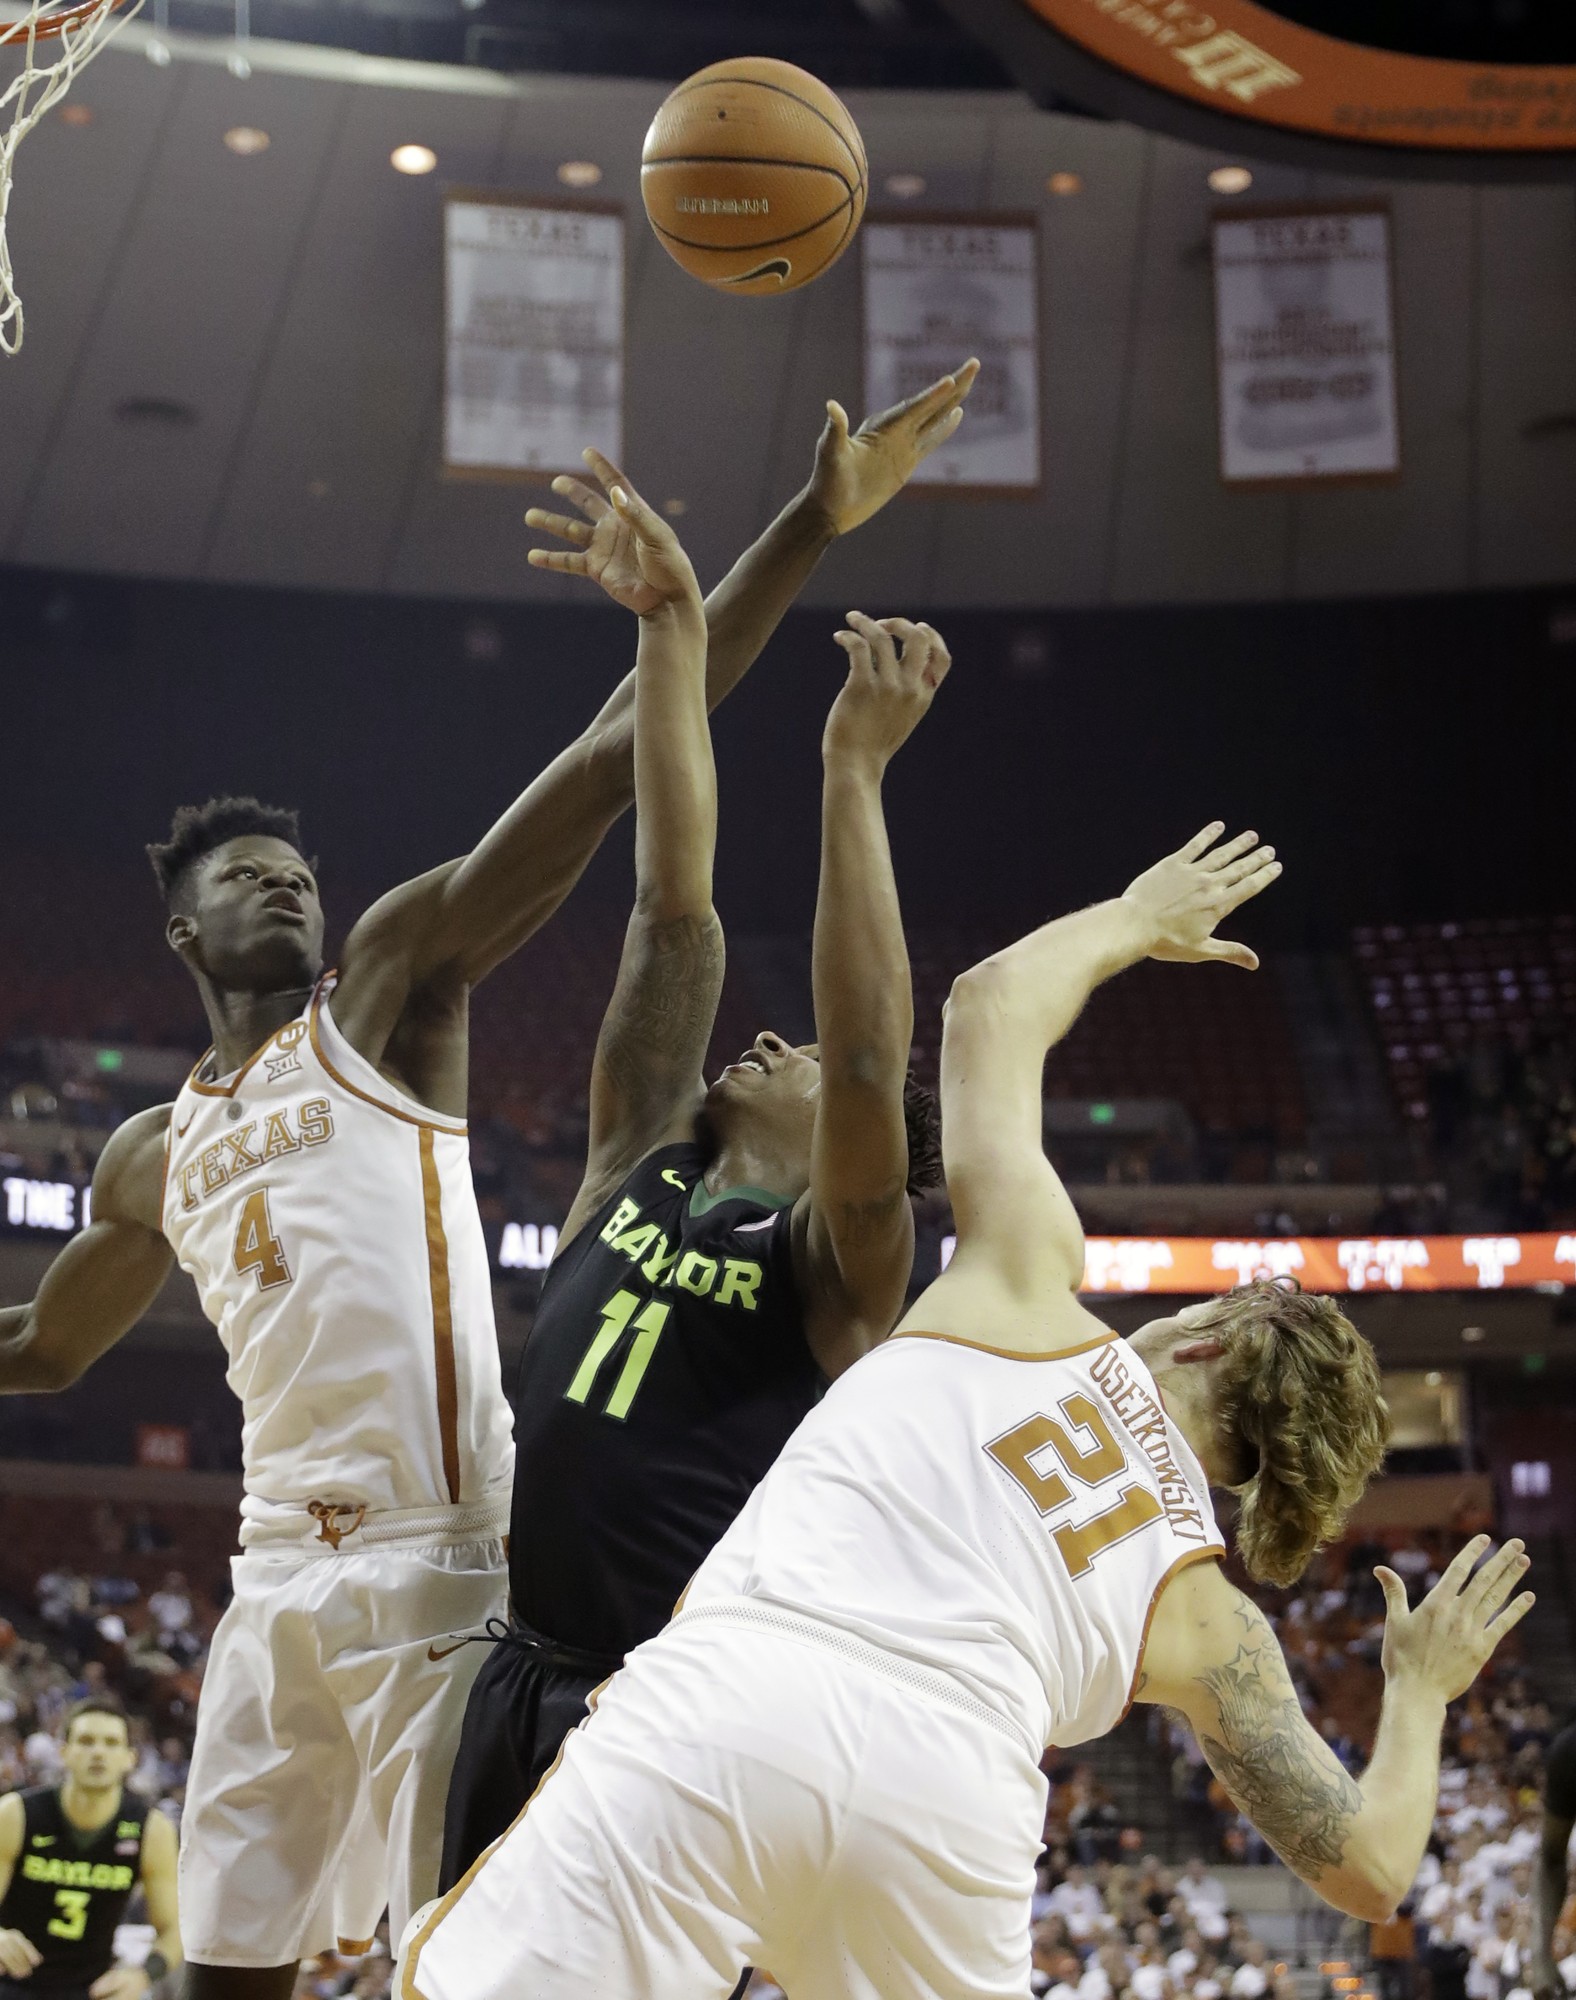 Bears edge past Longhorns in double OT | The Baylor Lariat